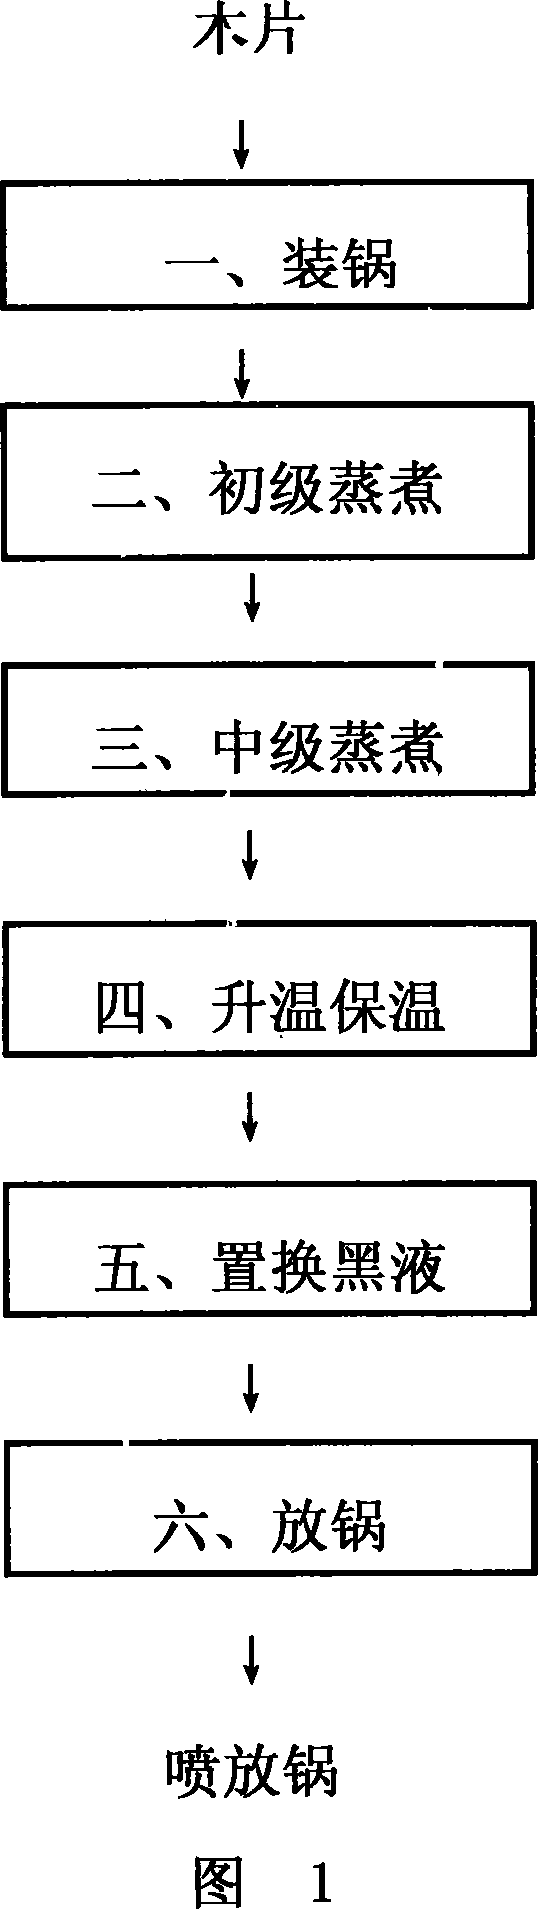 Method for producing Chinese red pine chemical pulp